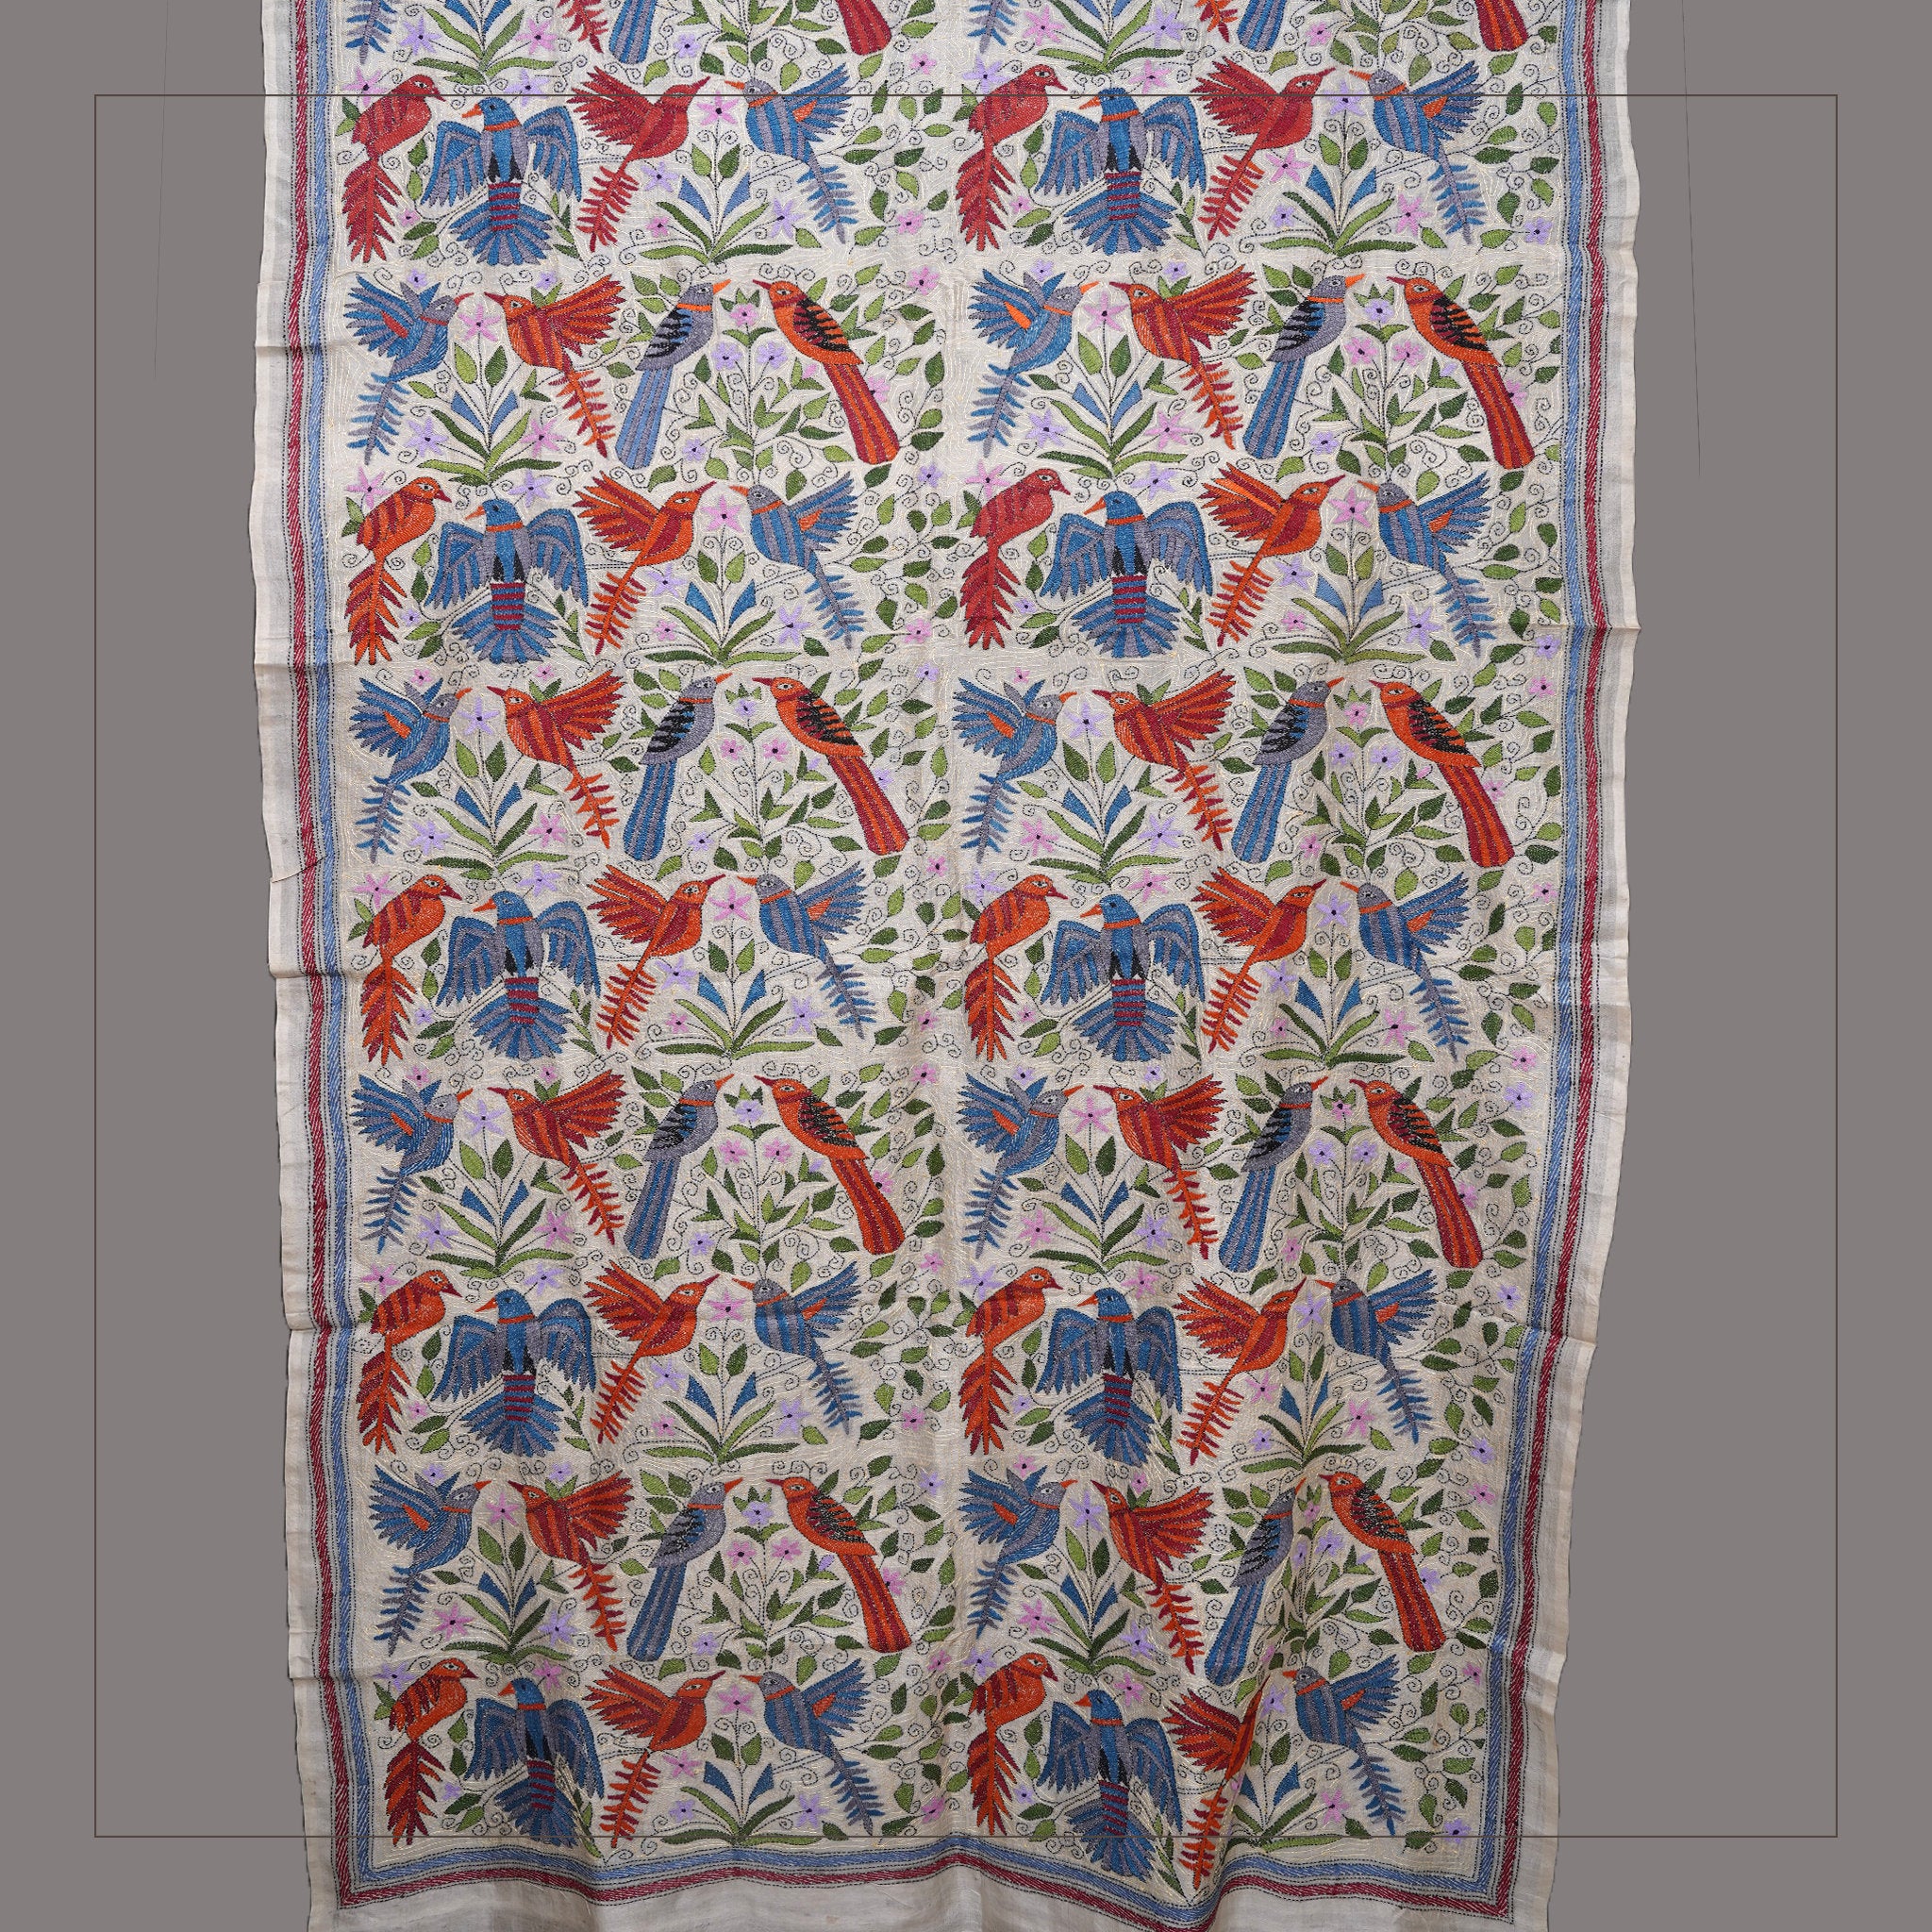 Hand-embroidered Kantha Shawl on Tussar